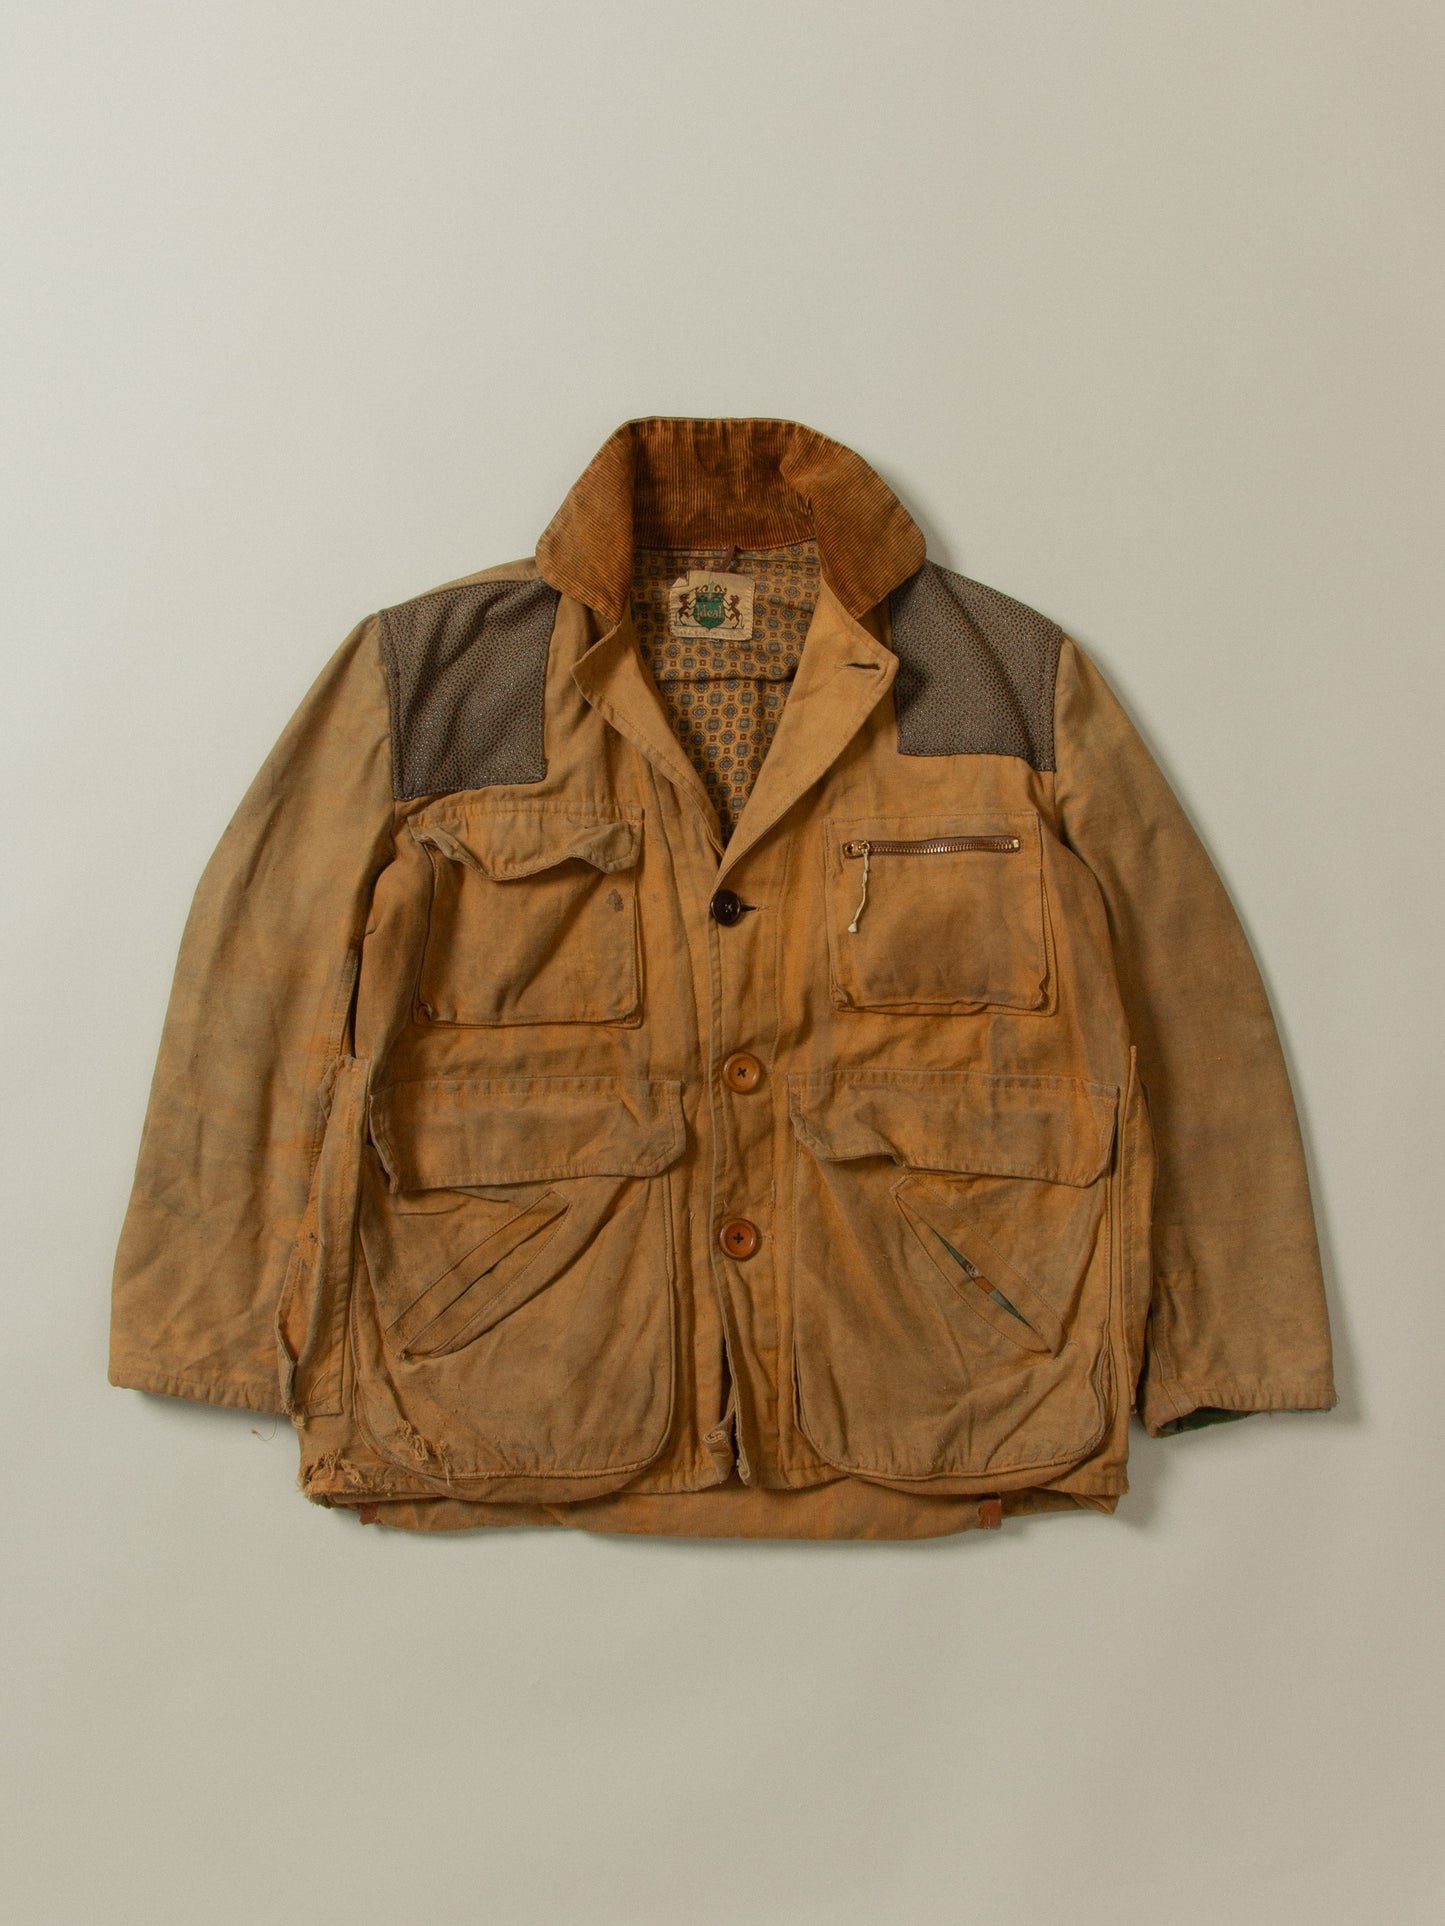 Vtg 1950s Ideal Hunting Jacket - Made In USA (M)